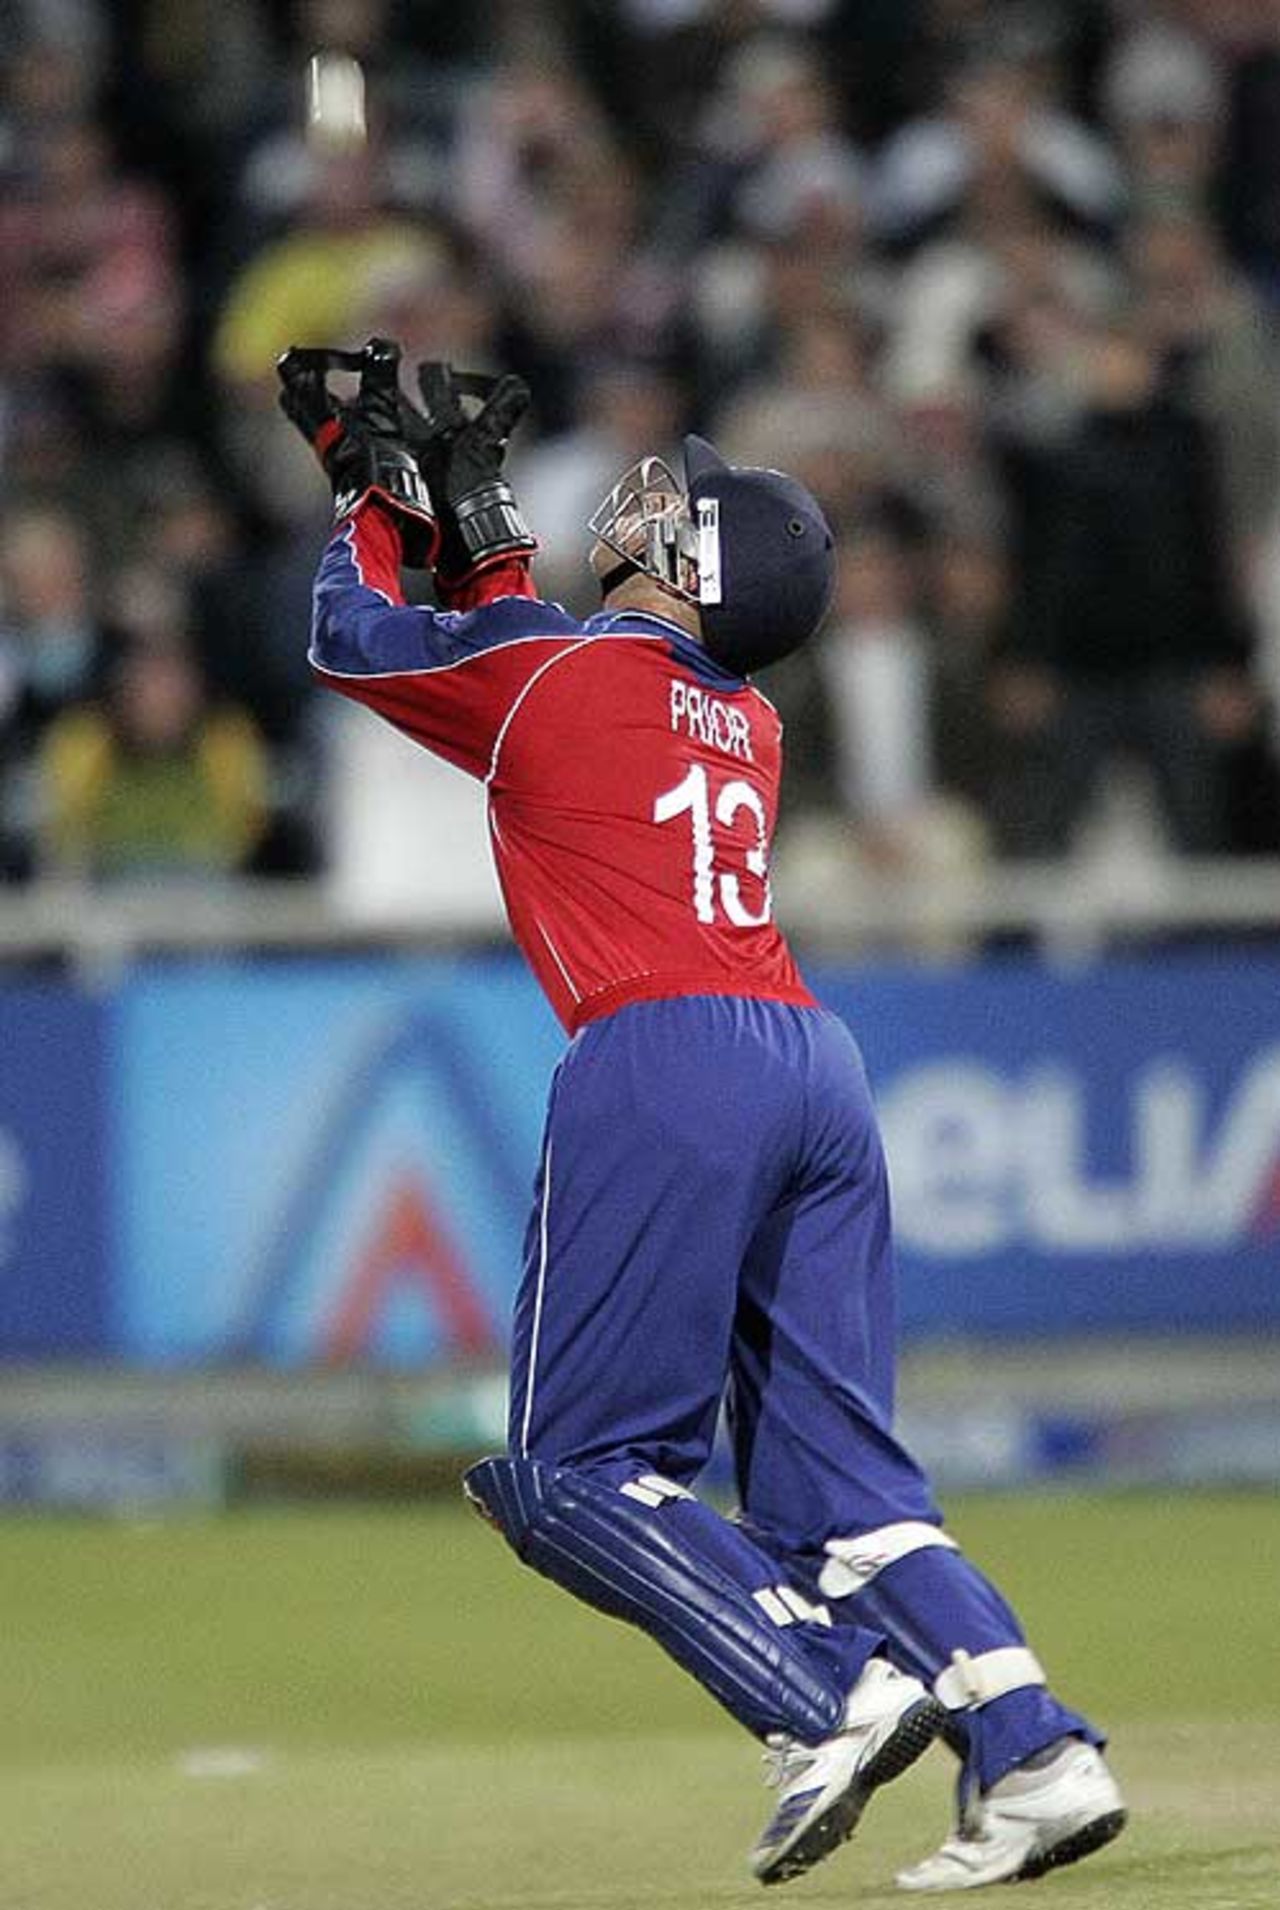 Matt Prior dives to take the wicket of Justin Kemp, Group E, ICC World Twenty20, Cape Town, September 16, 2007